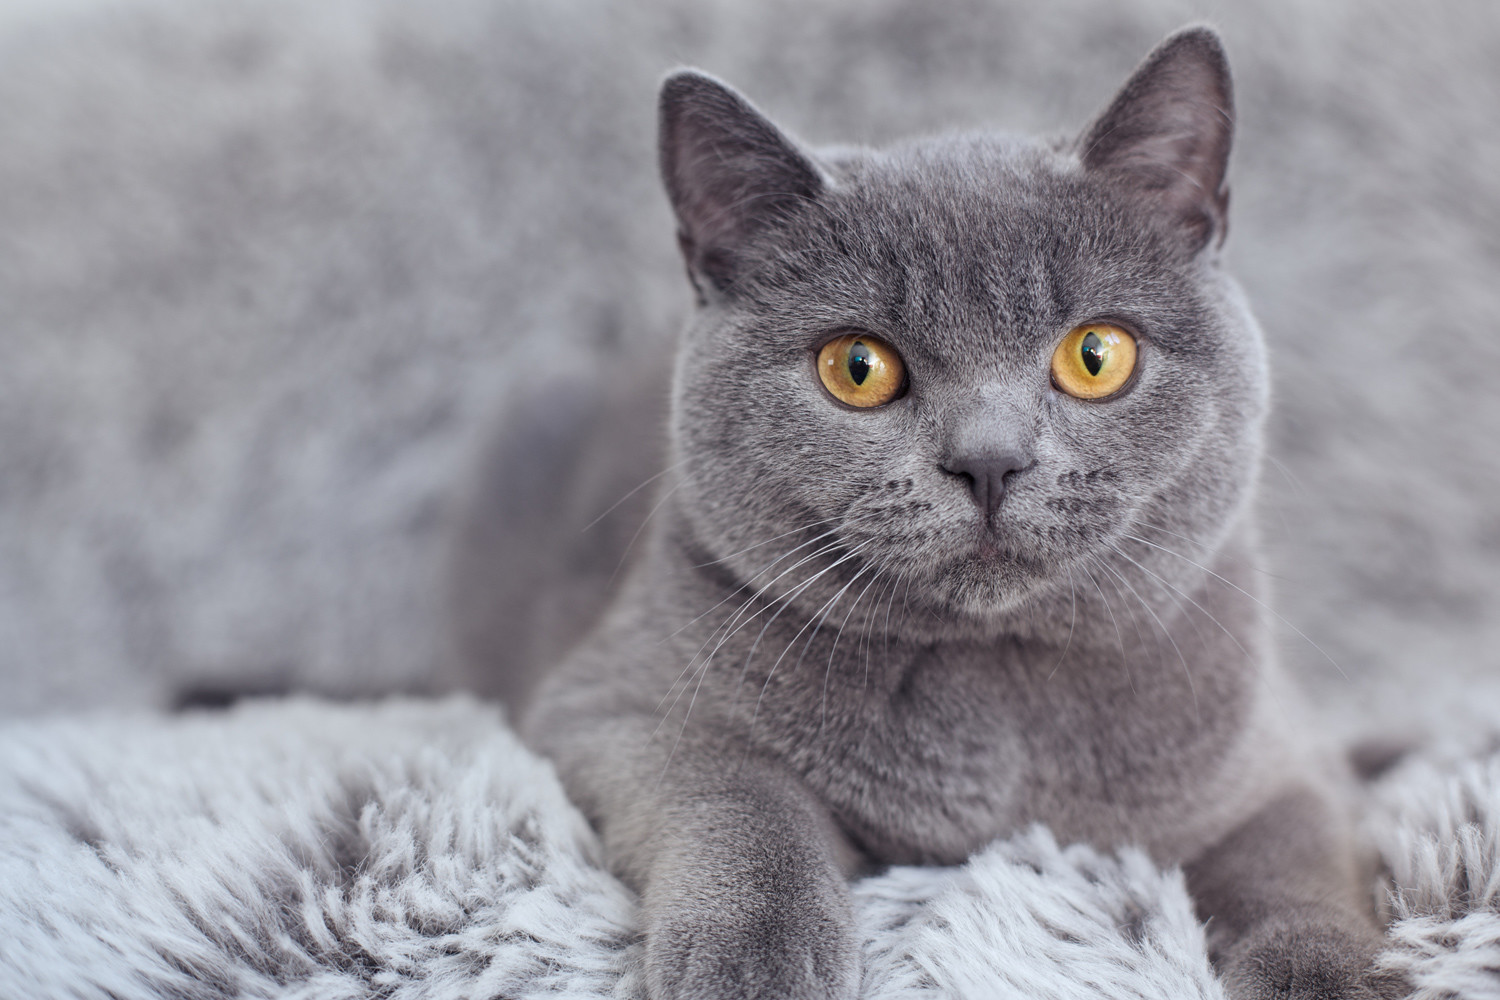 British Shorthair cats are second most popular.